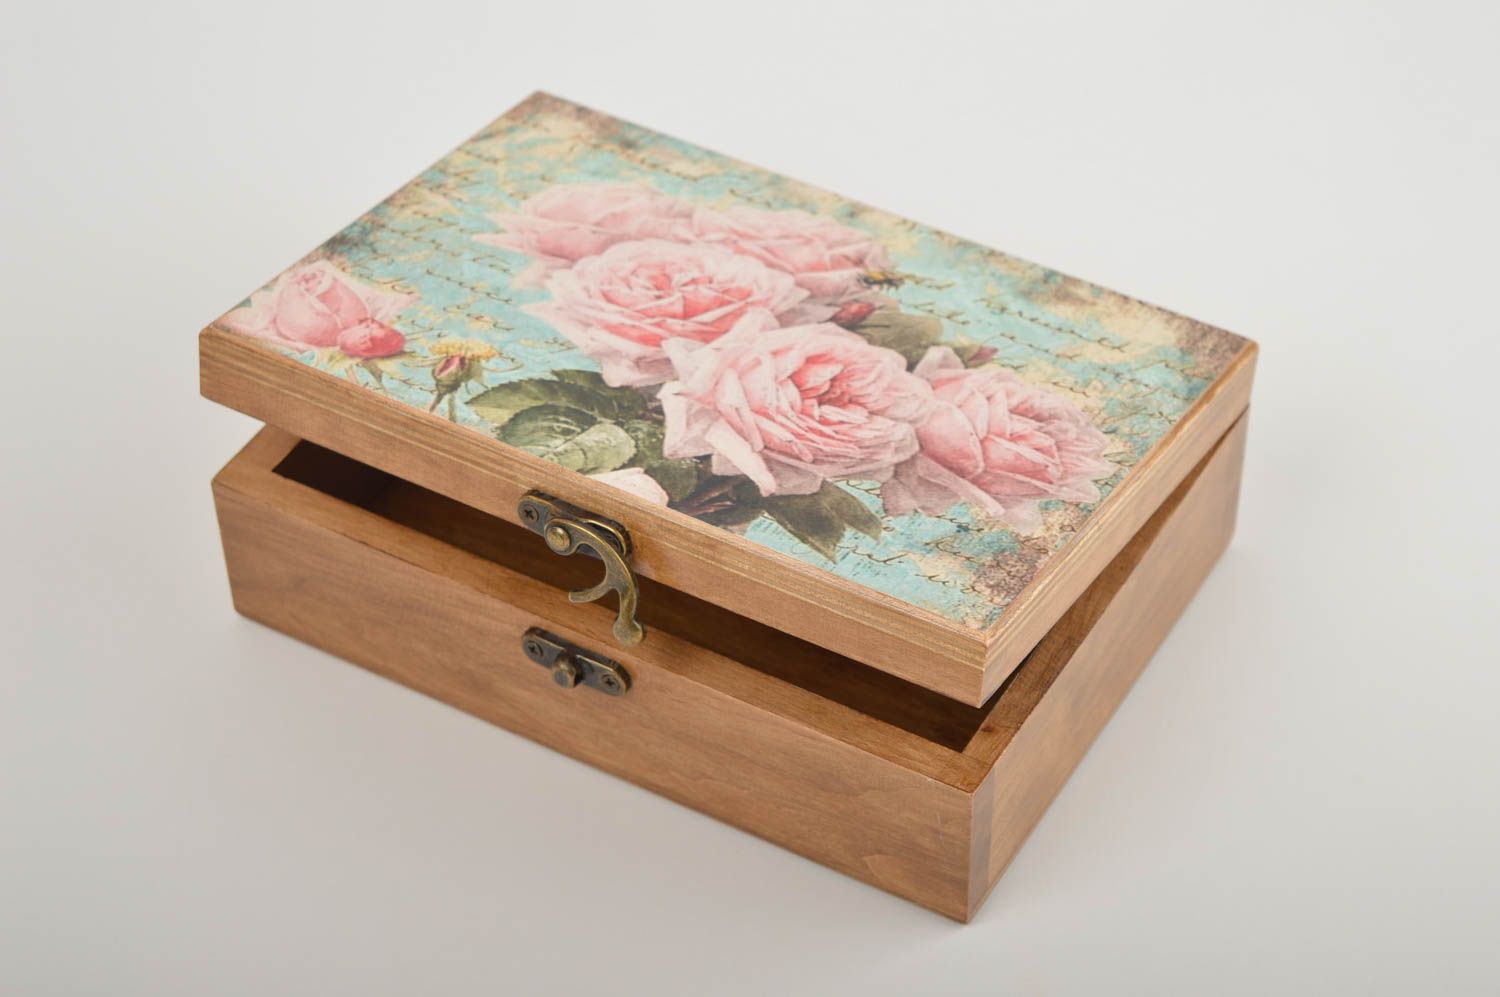 Handmade jewelry box wooden jewelry gift boxes gifts for women home decor photo 2